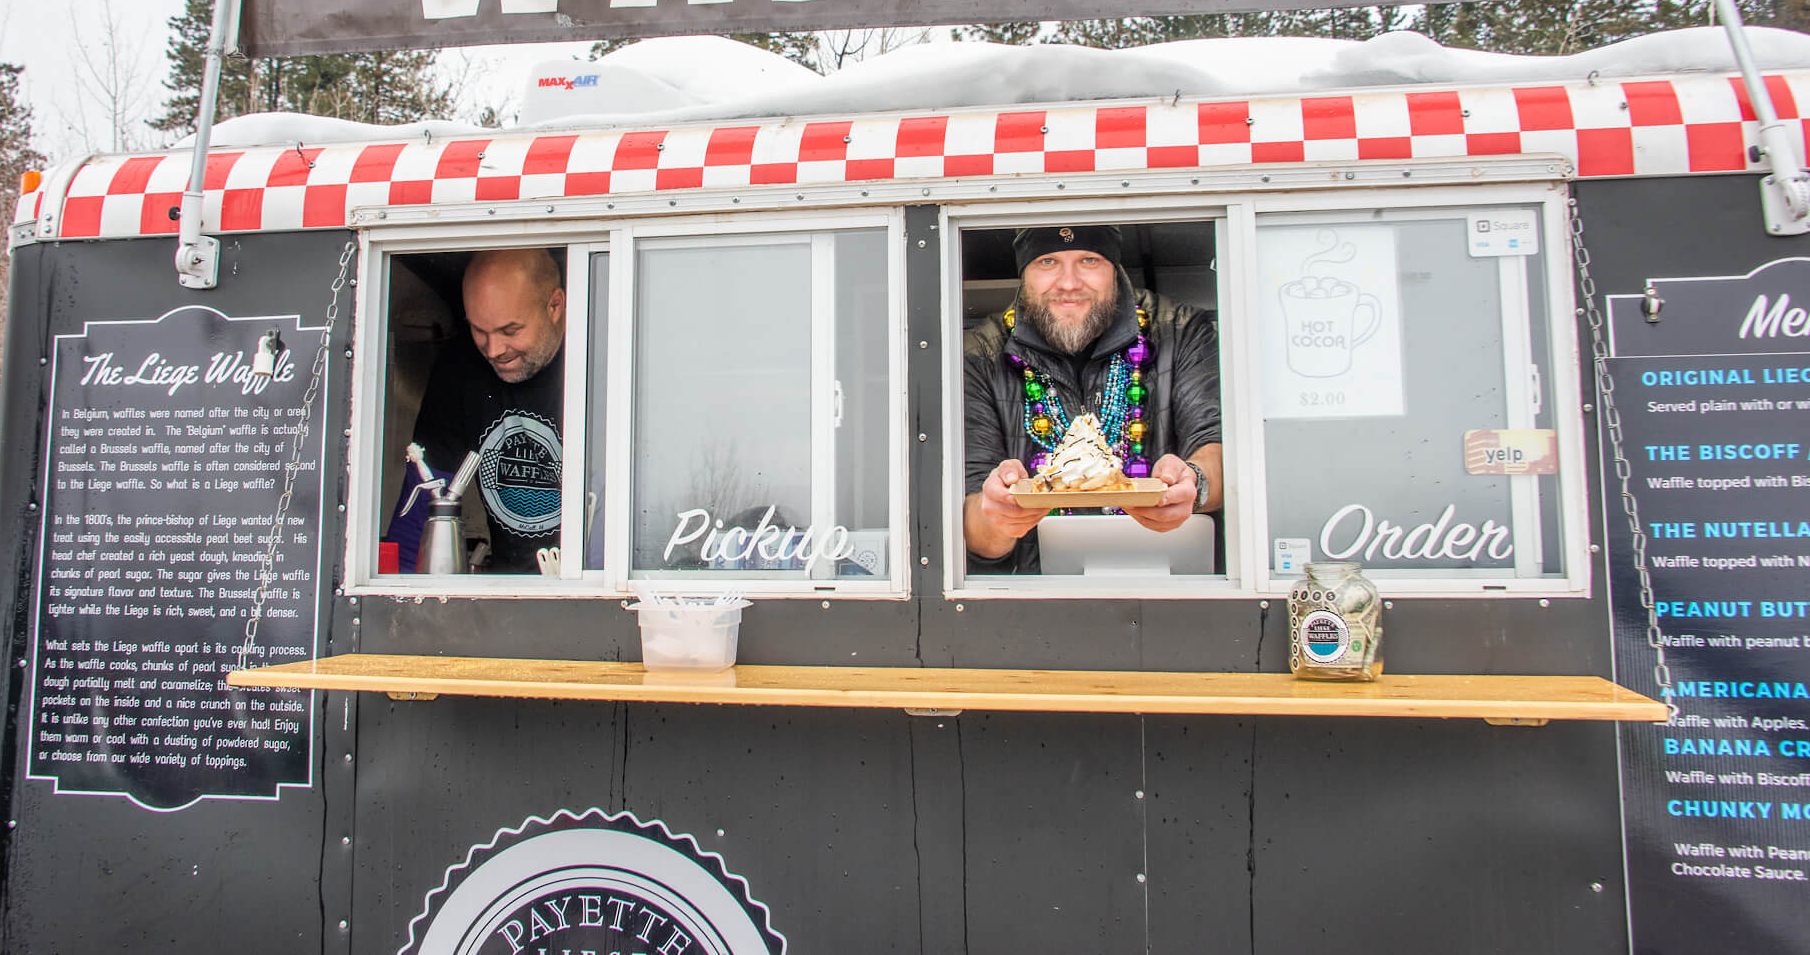 A man smiles and holds out a plate of waffles while inside a food truck.